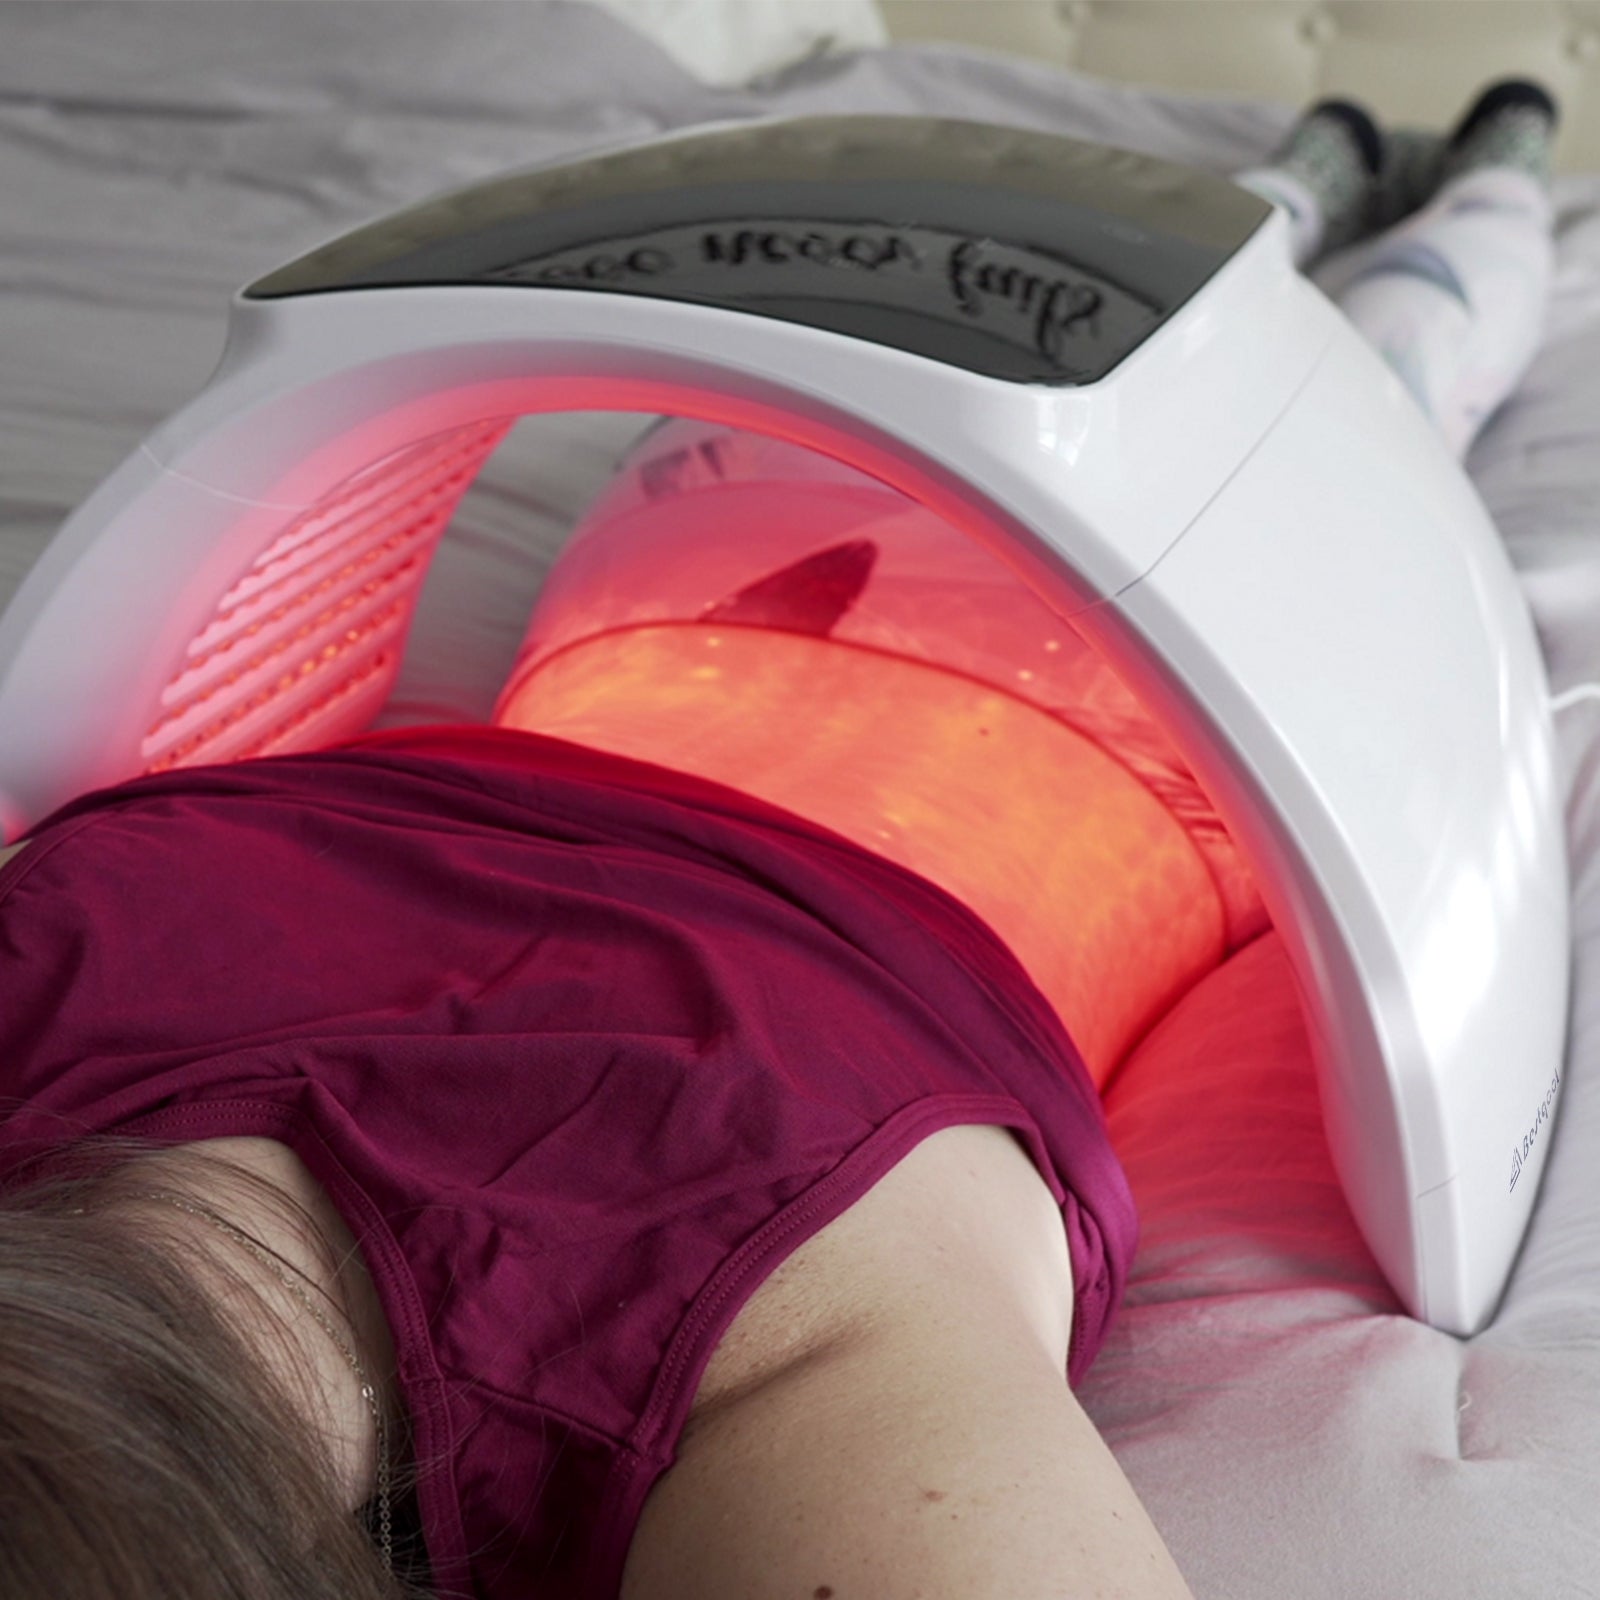 effective light therapy for face